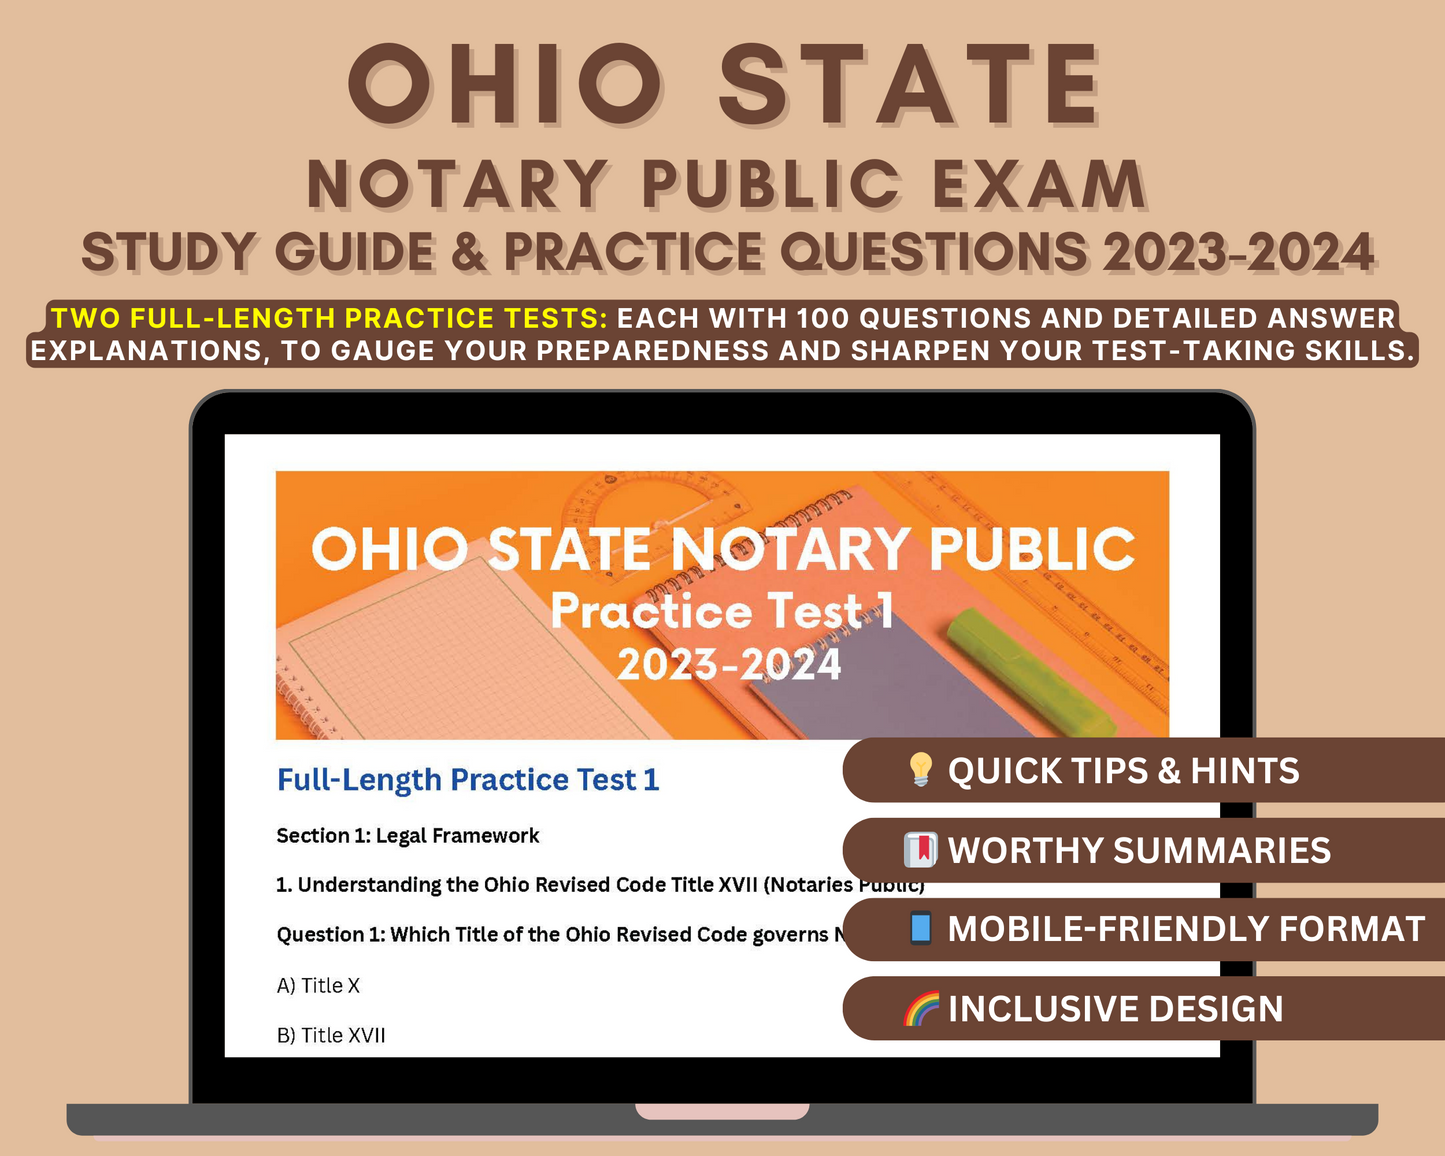 Ohio State Notary Public Exam Study Guide 2023-2024: In-Depth Content Review, and Practice Tests for Notarial Success